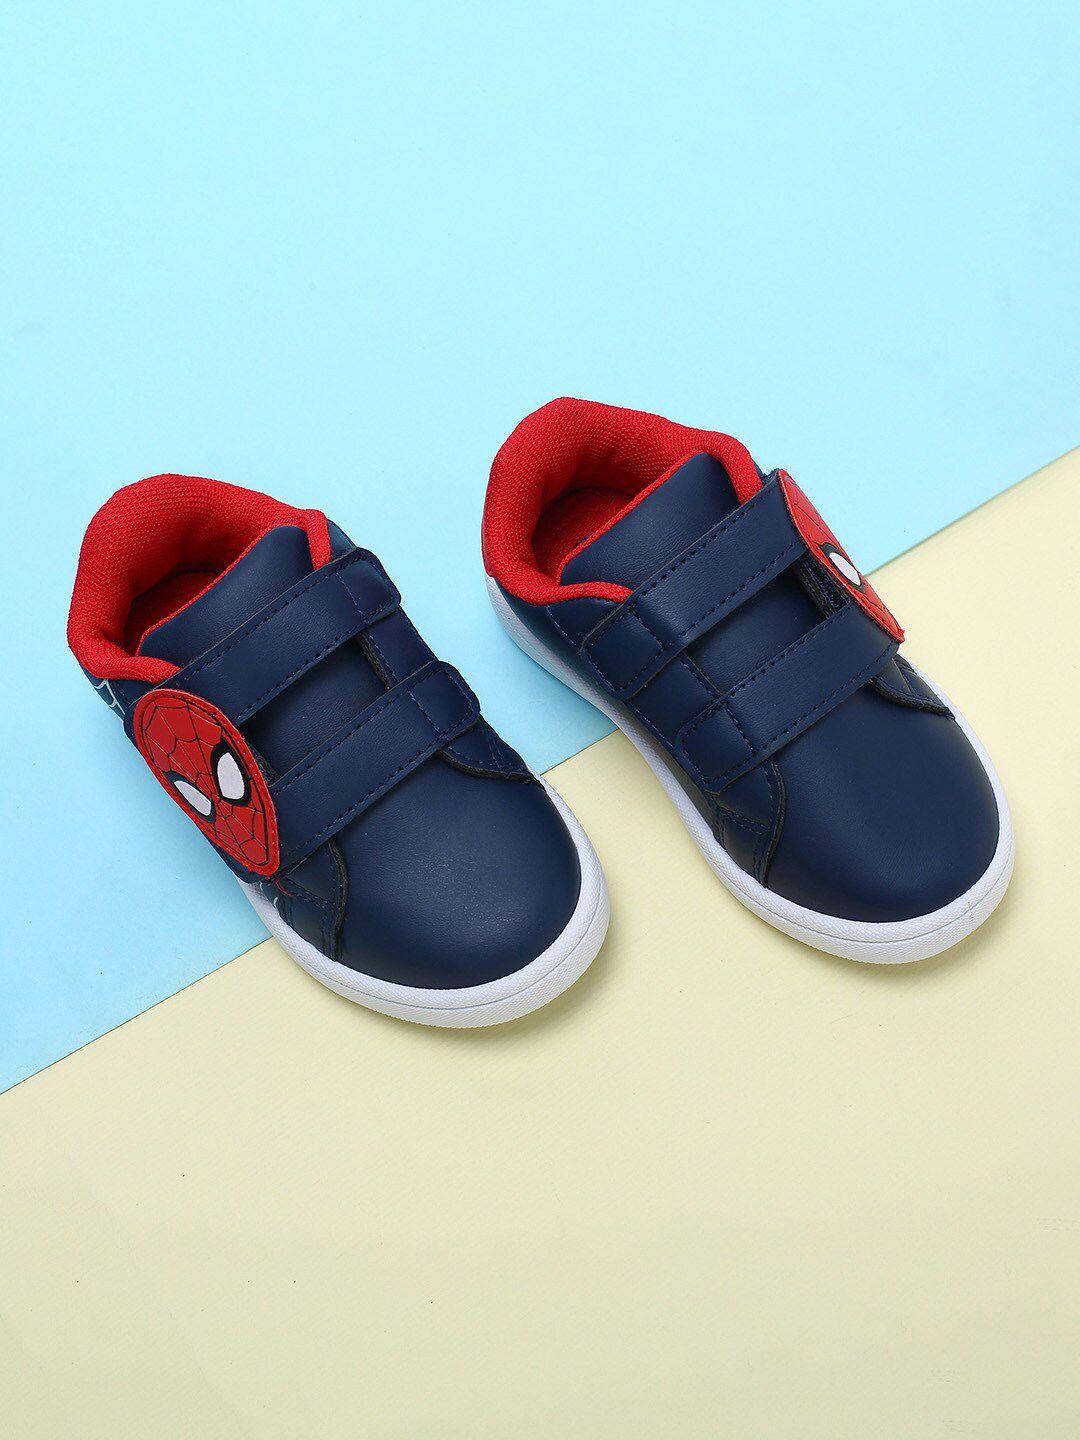 fame-forever-by-lifestyle-boys-navy-blue-&-red-printed-sneakers